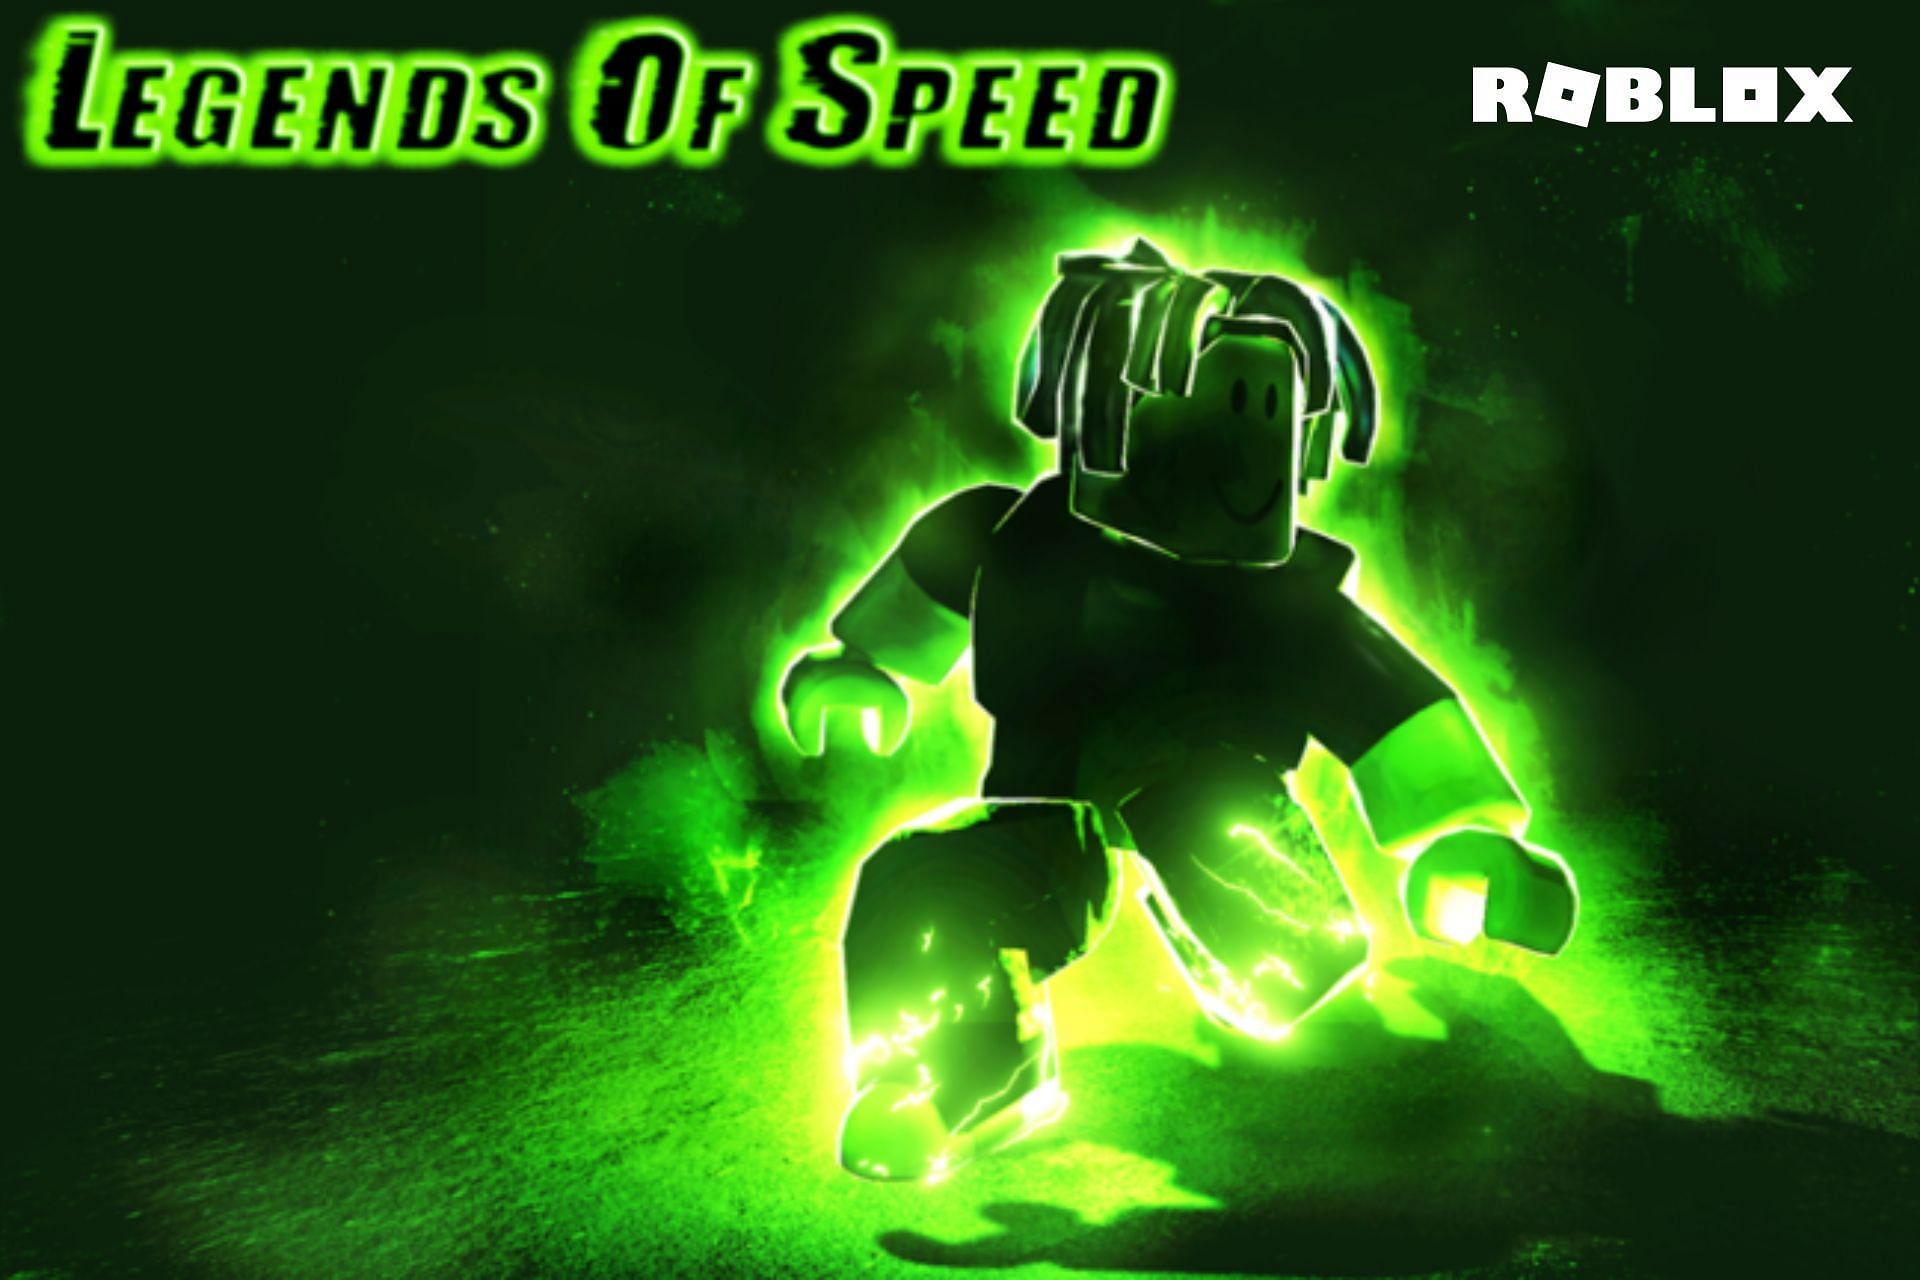 Legends of Speed codes in Roblox: Free gems and steps (November 2022)